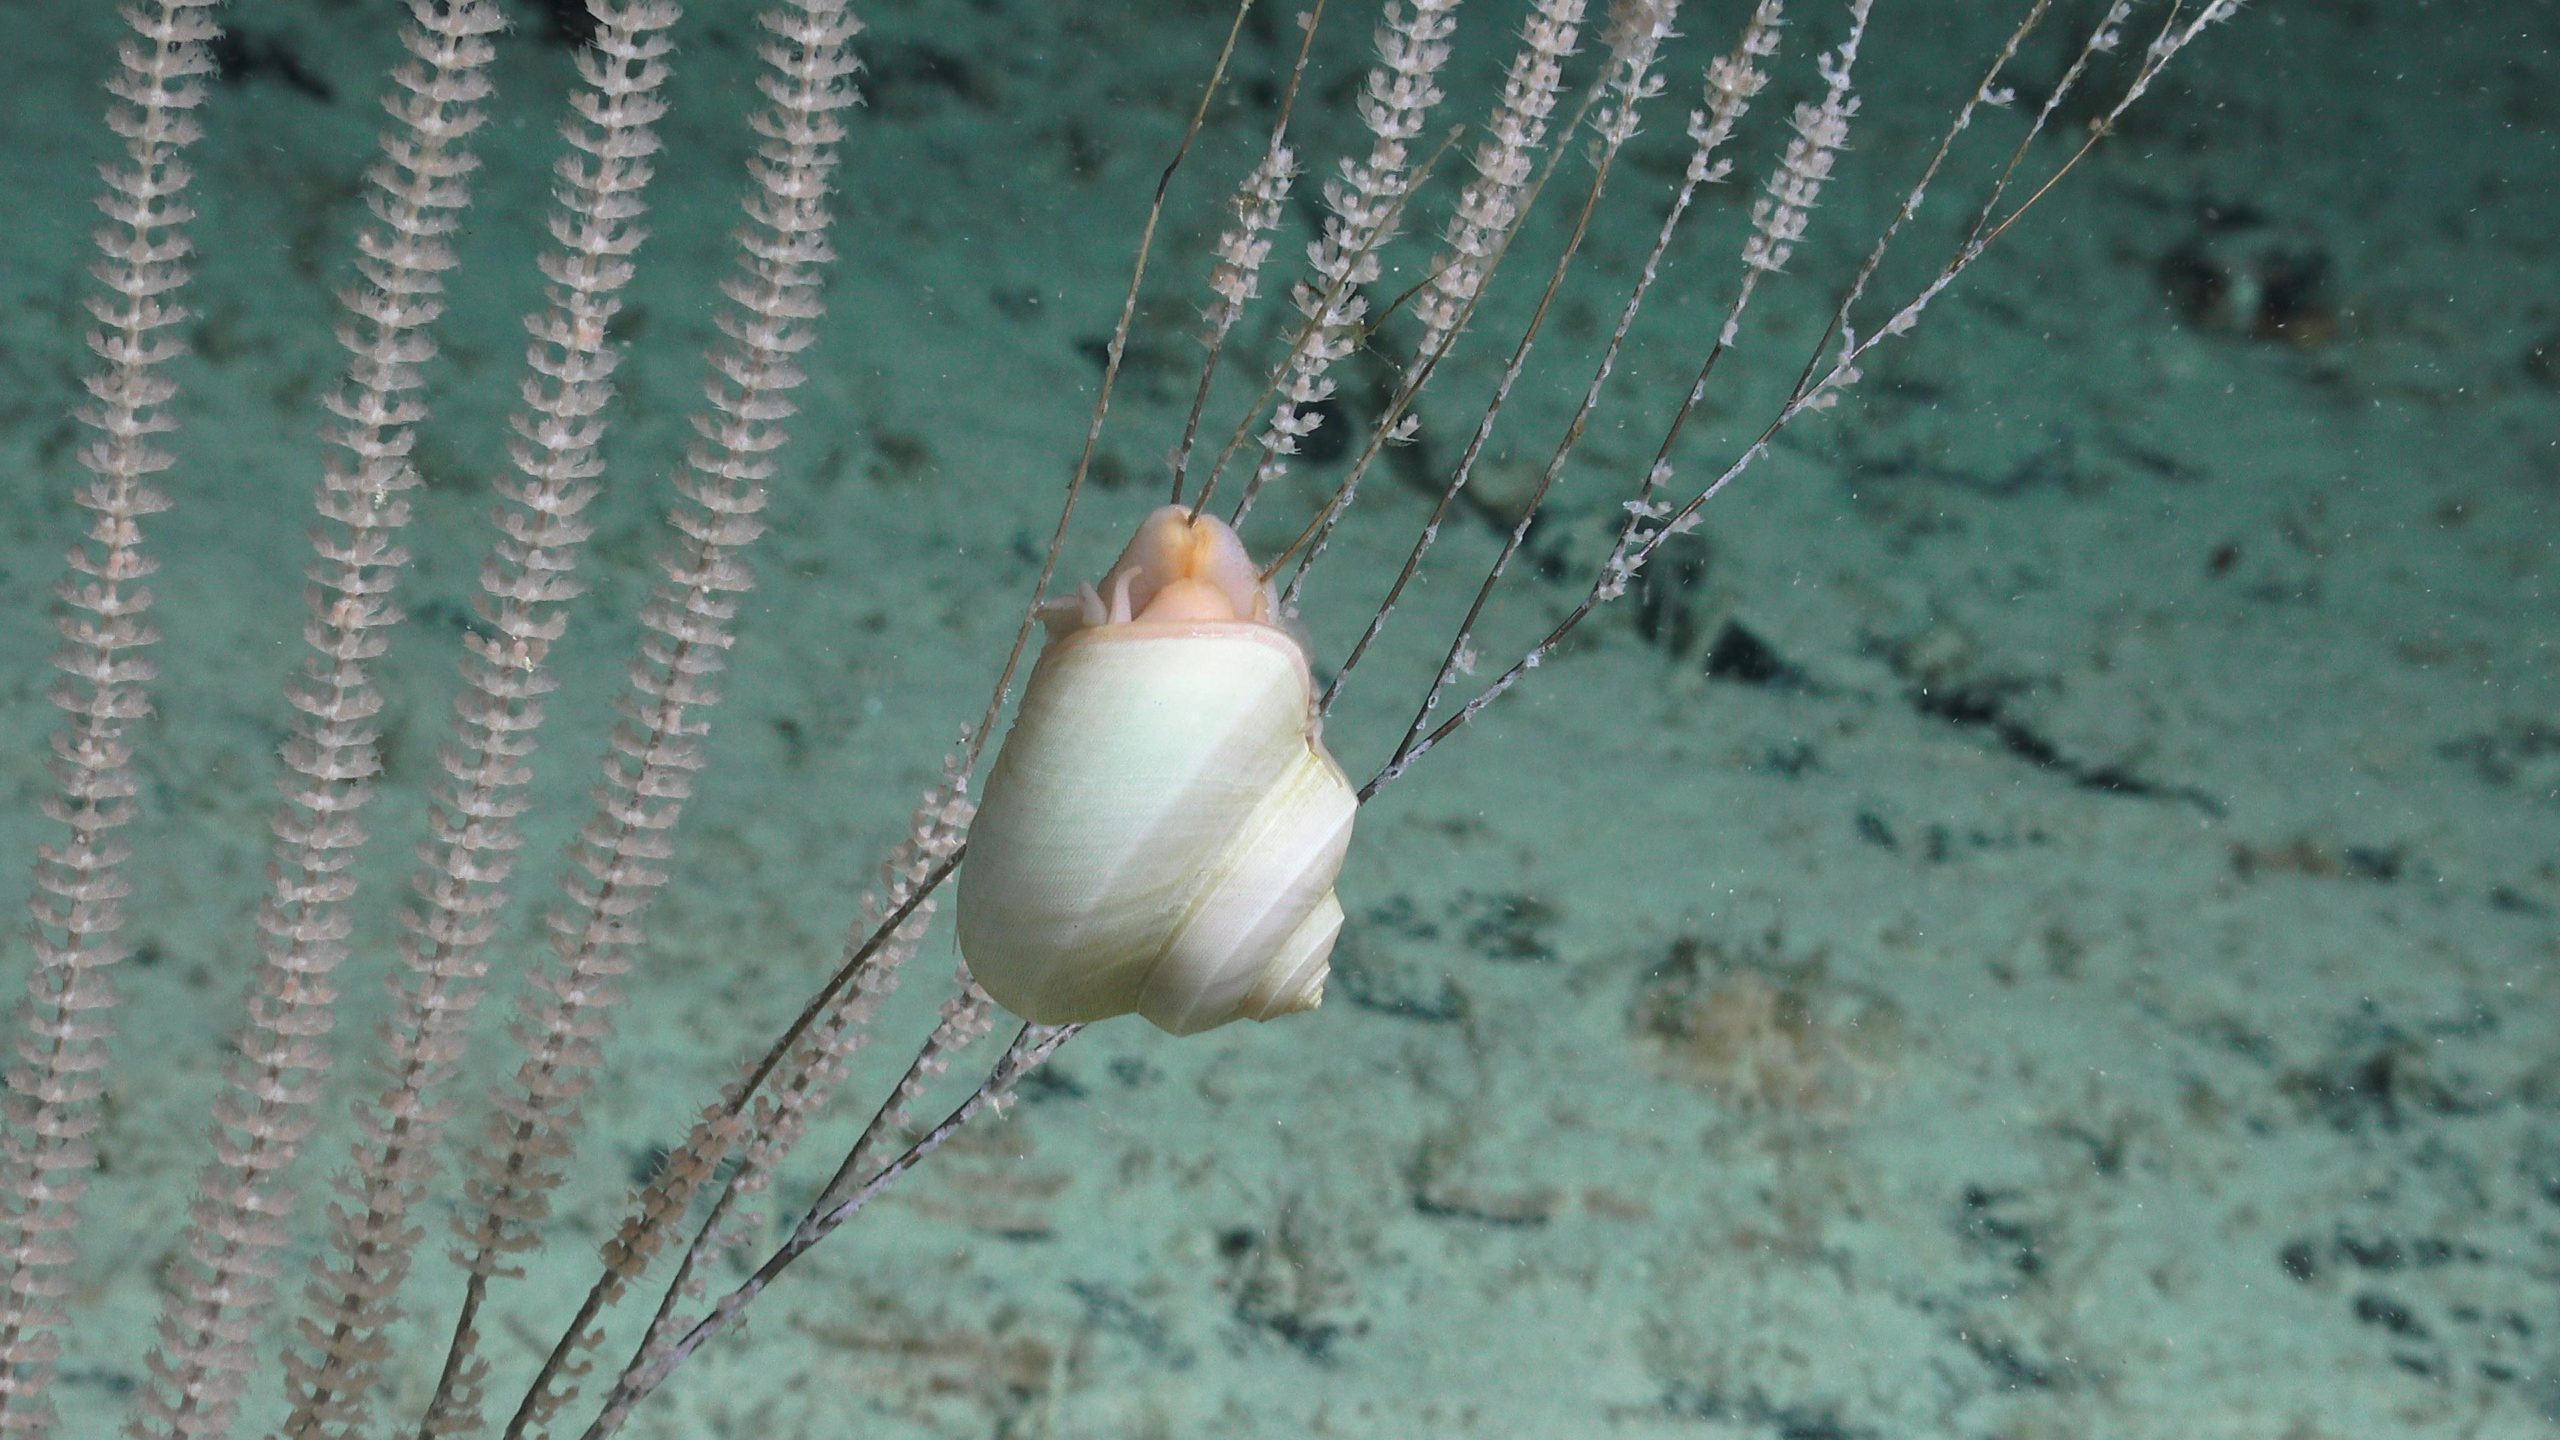 A snail perched in the deep sea. (Image: Schmidt Ocean Institute)